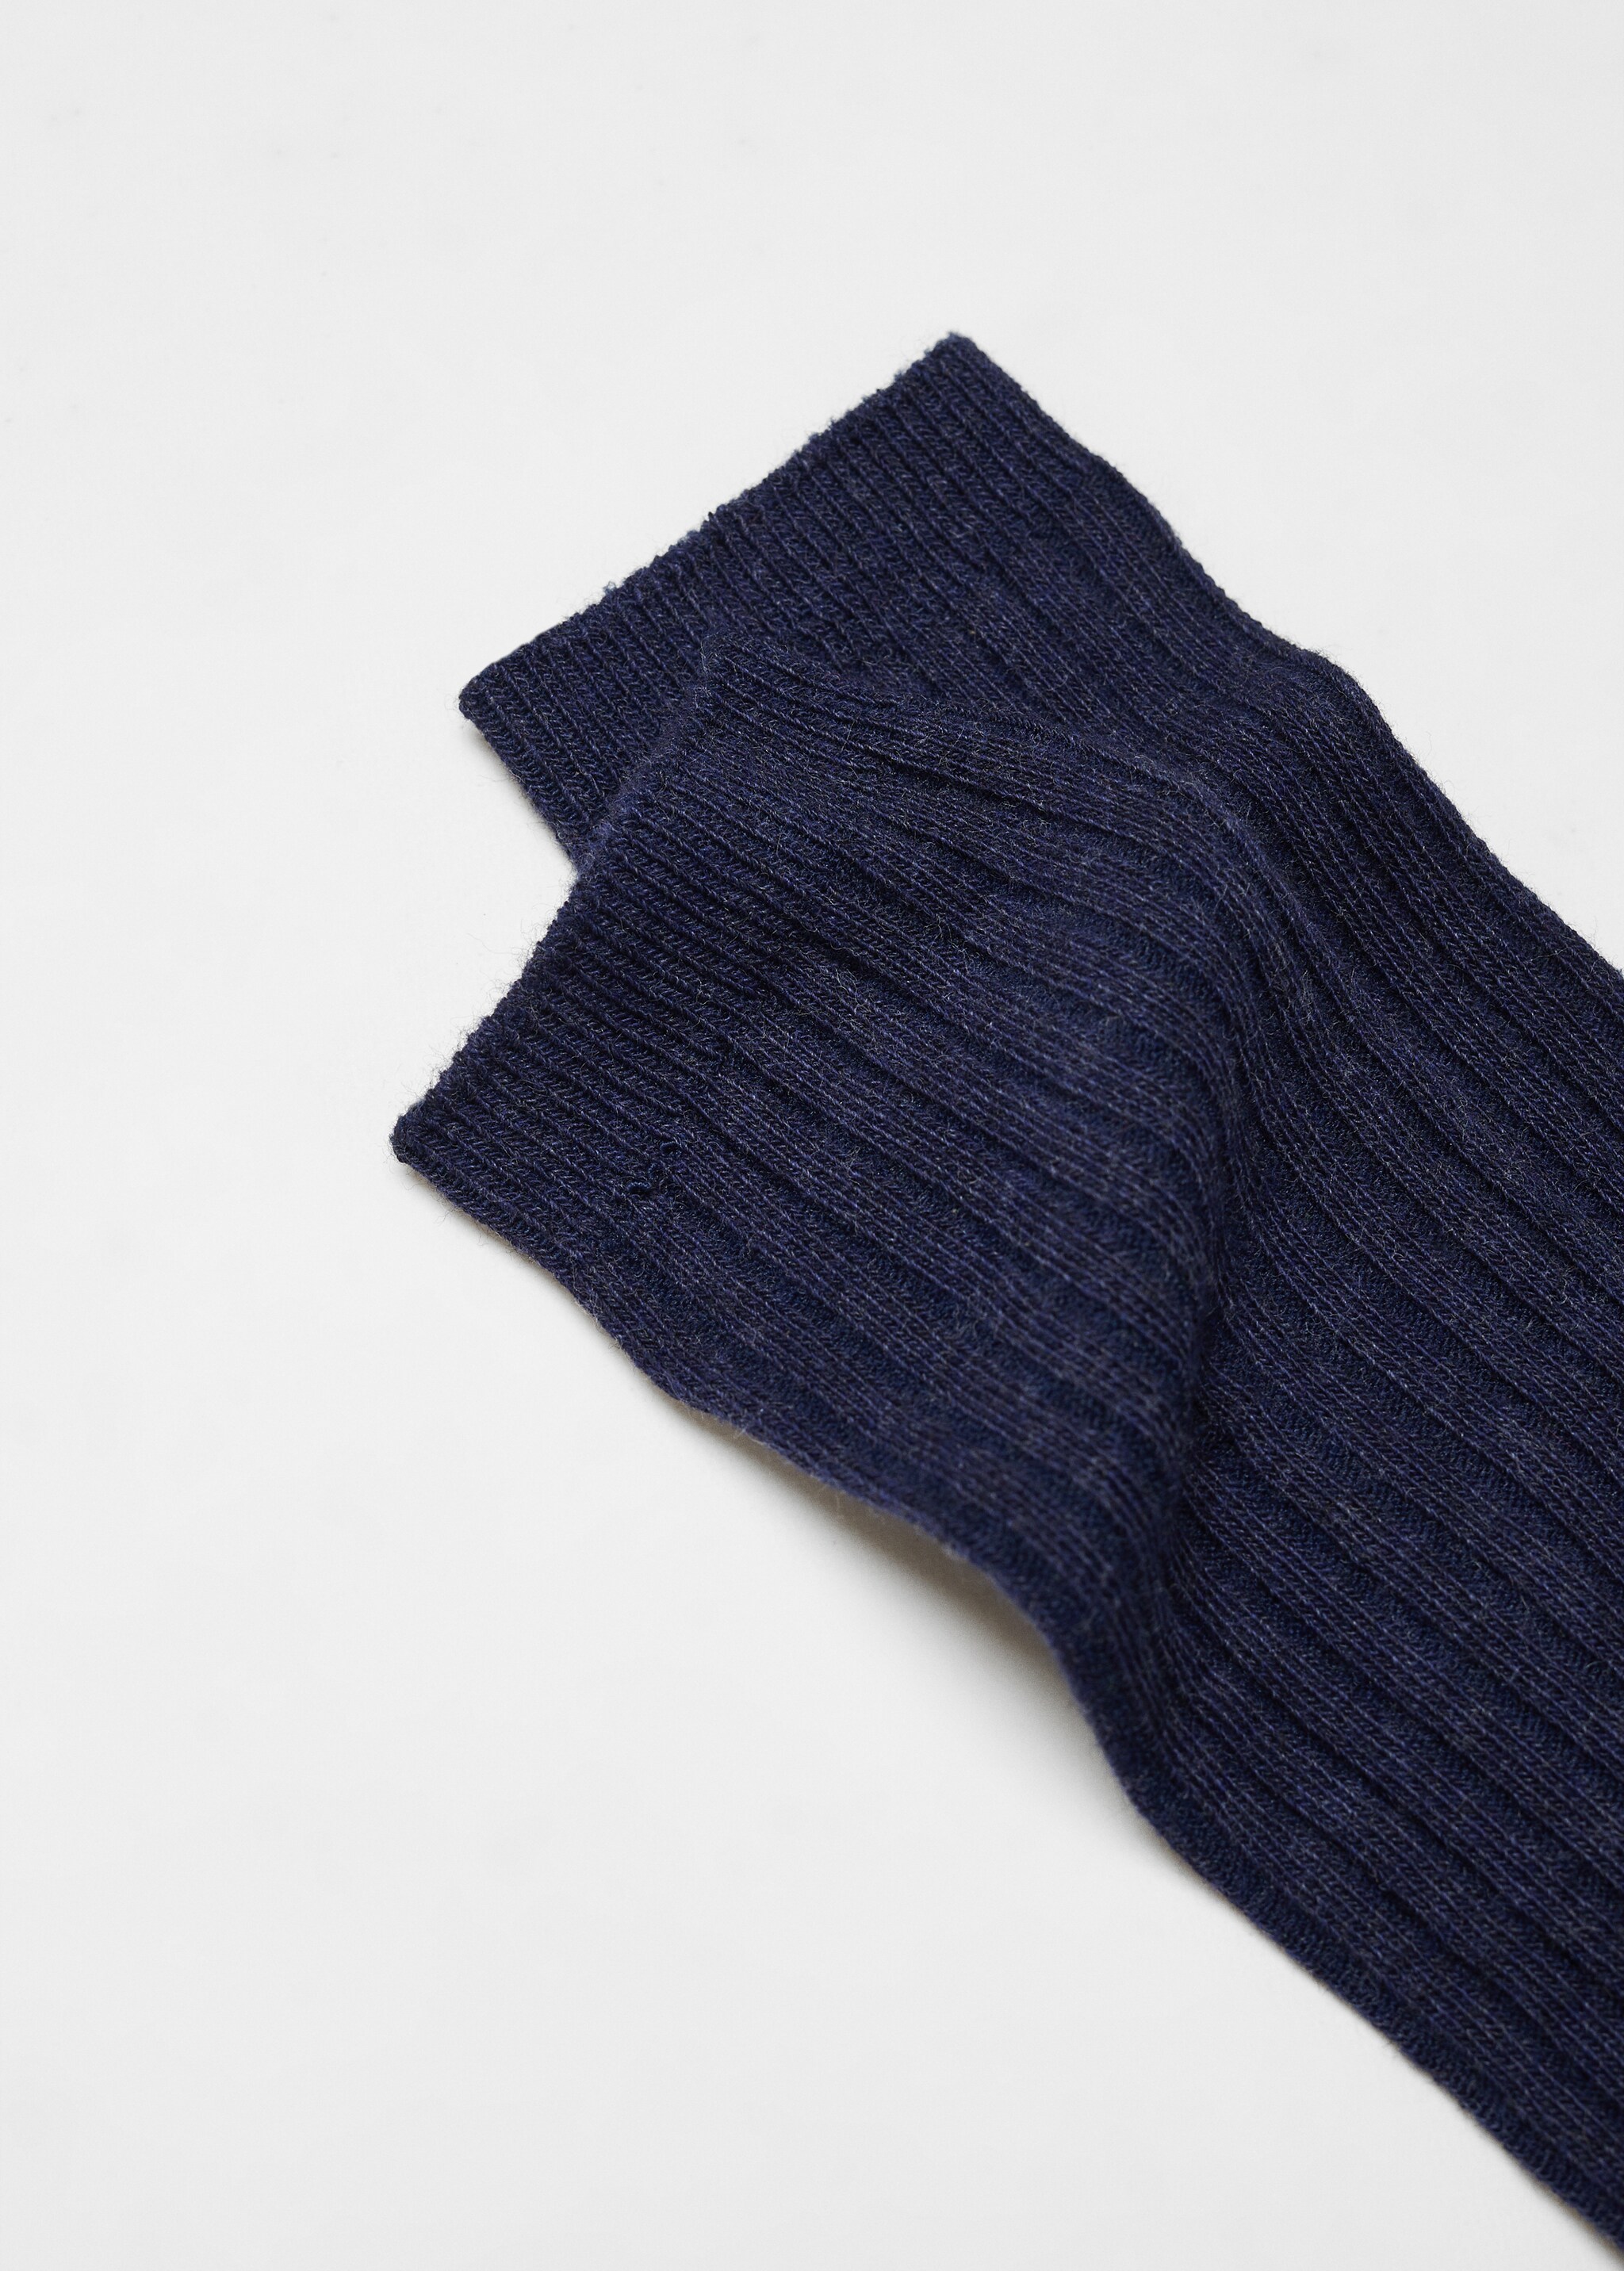 Knit socks - Details of the article 0